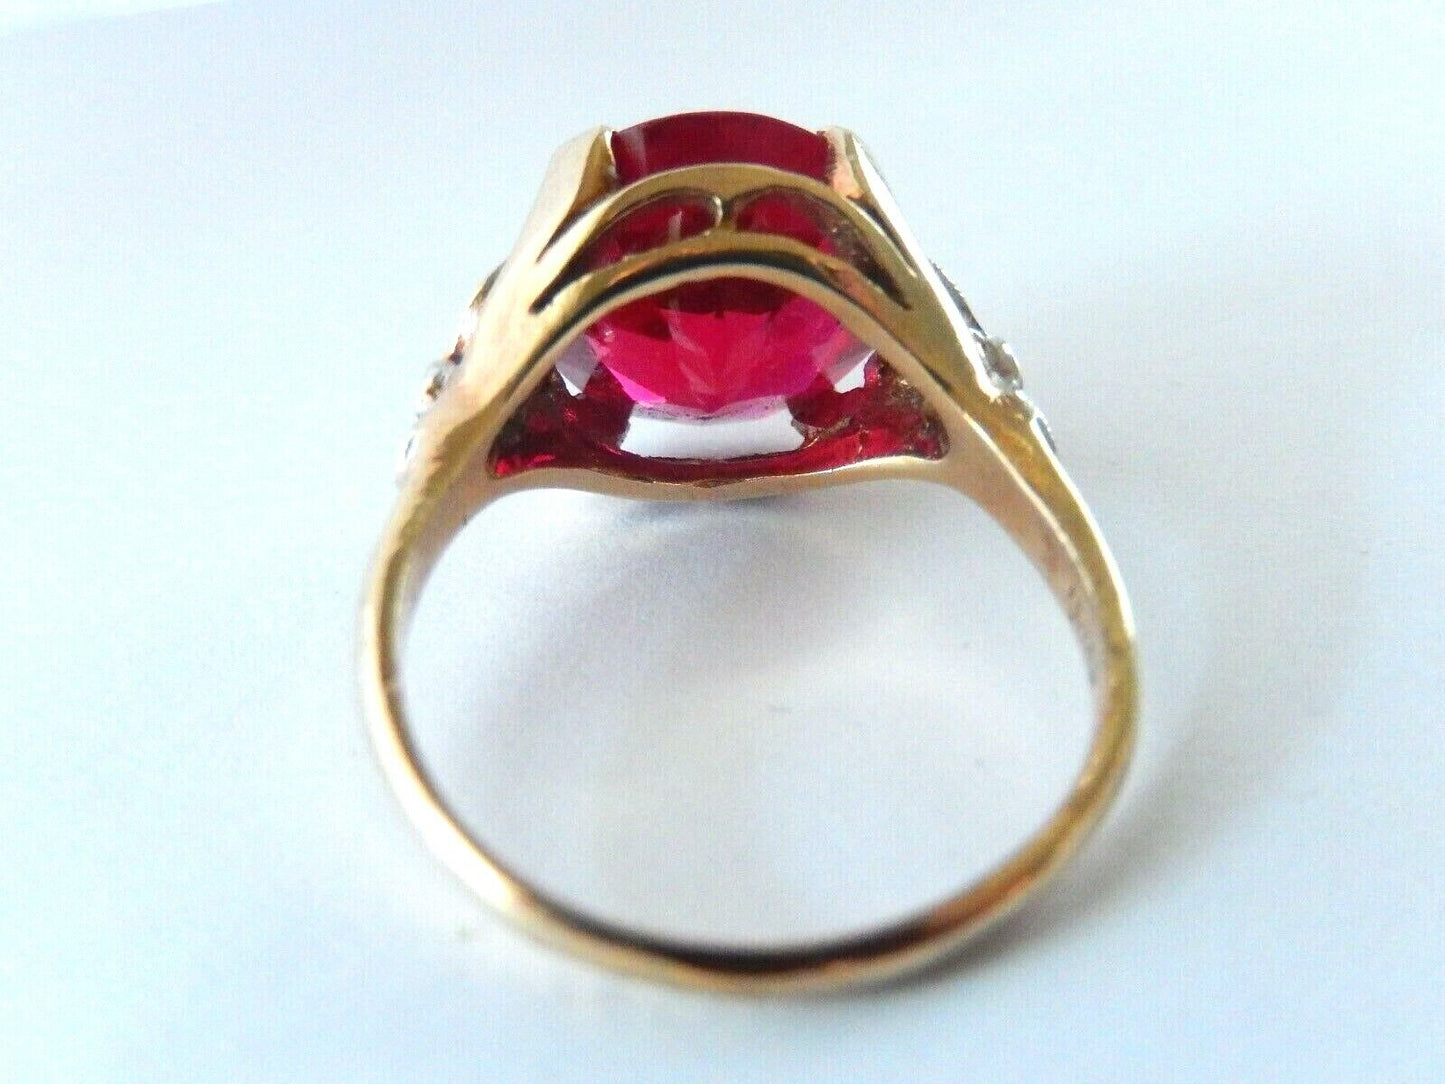 Fine Vintage 10k Gold 8.75ct Red Ruby Solitaire Gemstone Cocktail Ring Sz 8.5